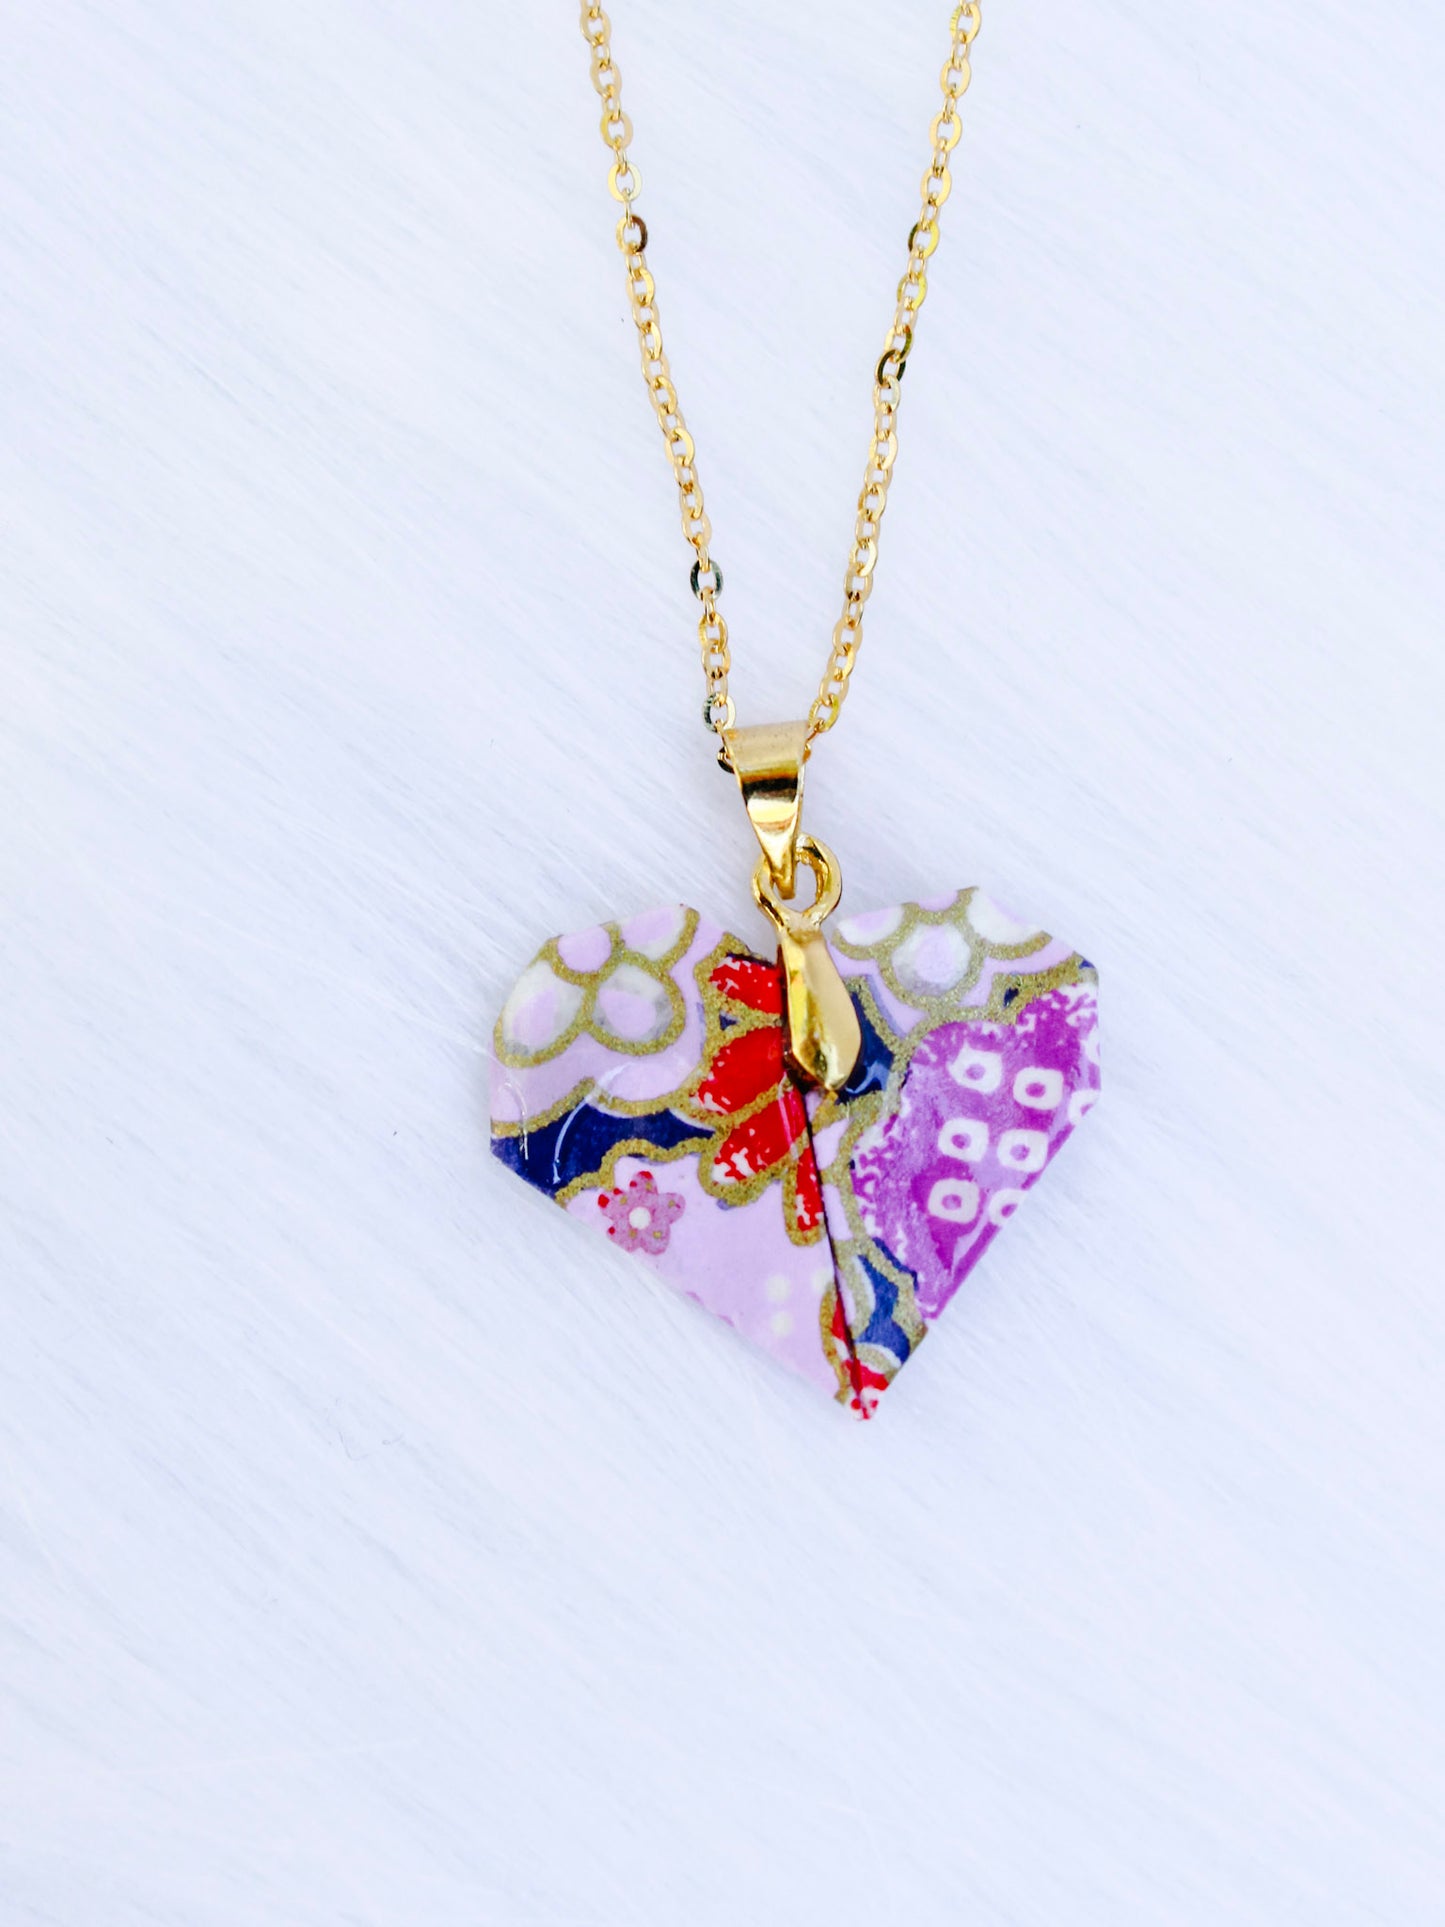 Origami Necklace - Love Heart